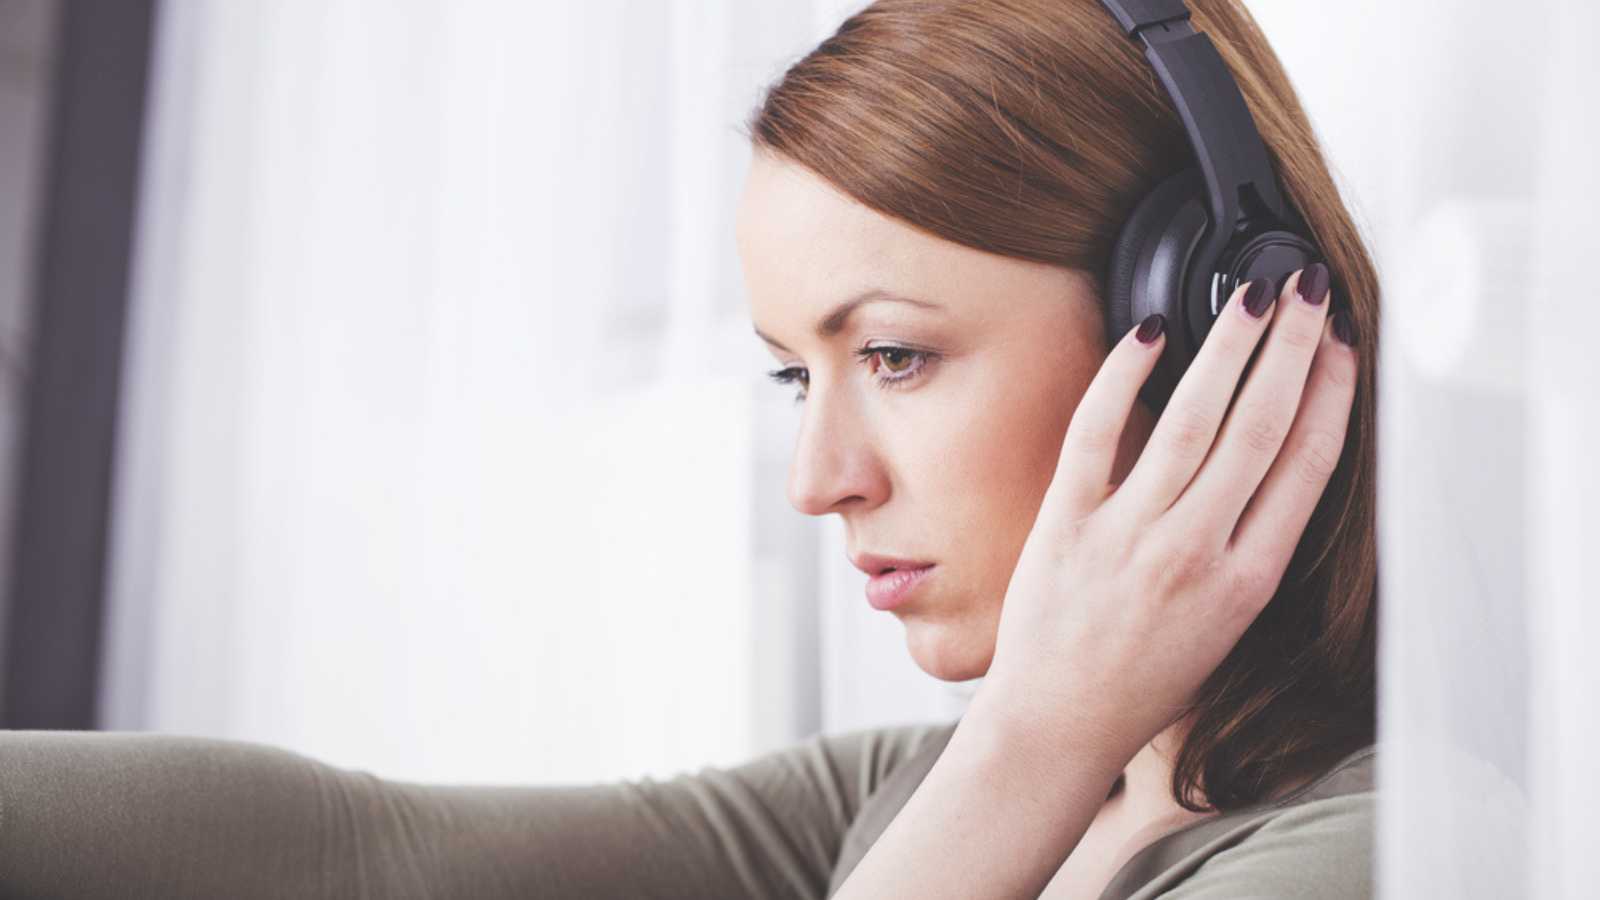 Woman hearing music and feeling emotional